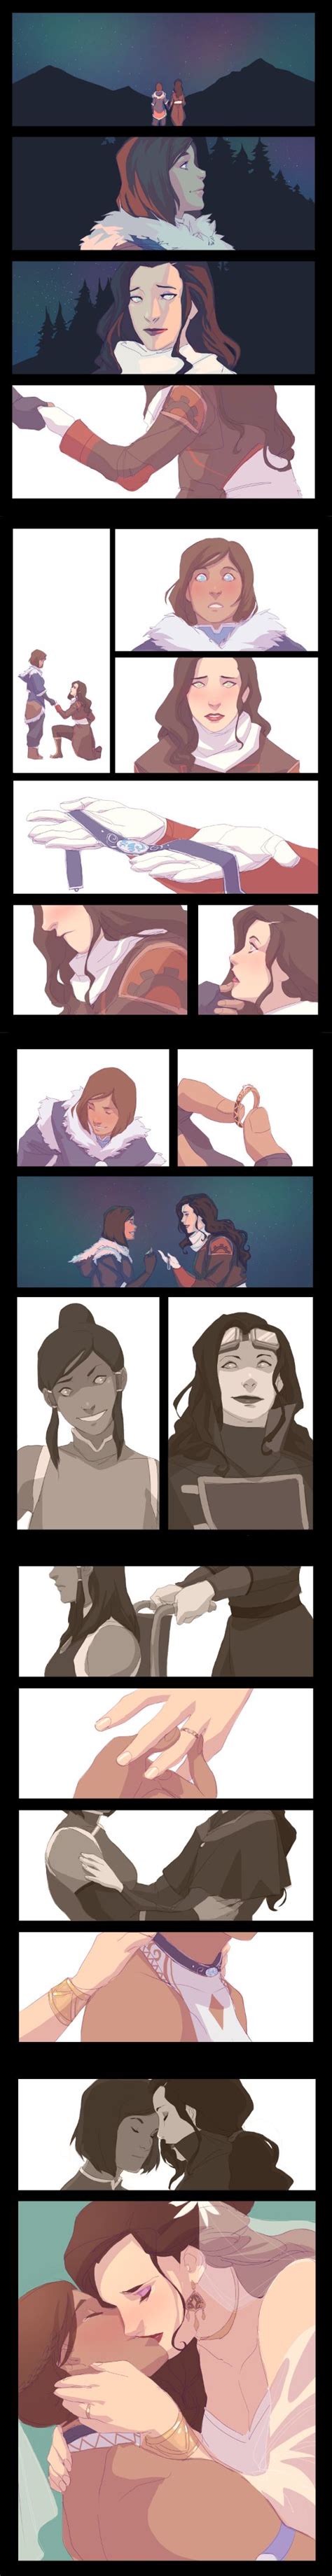 97 best images about korrasami on pinterest canon posts